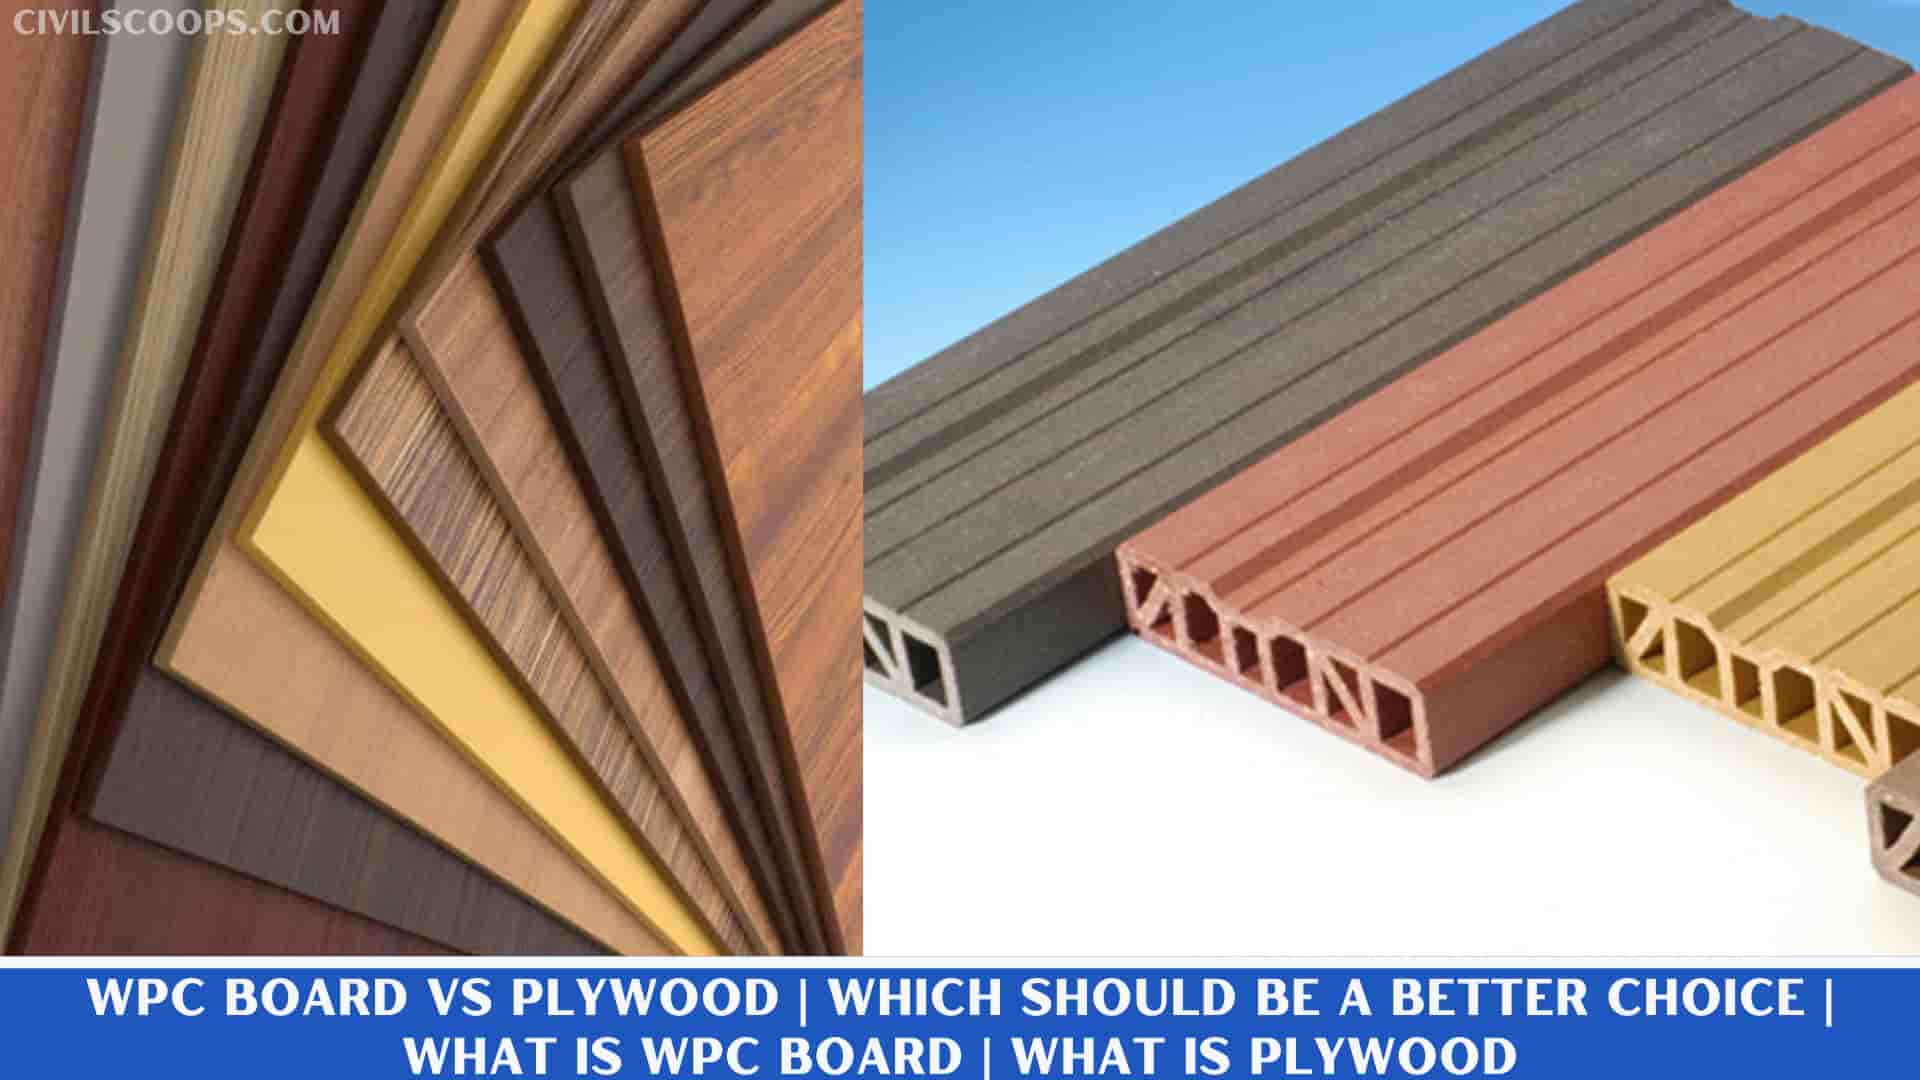 WPC Board Vs Plywood | Which Should Be a Better Choice | What Is WPC Board | What Is Plywood